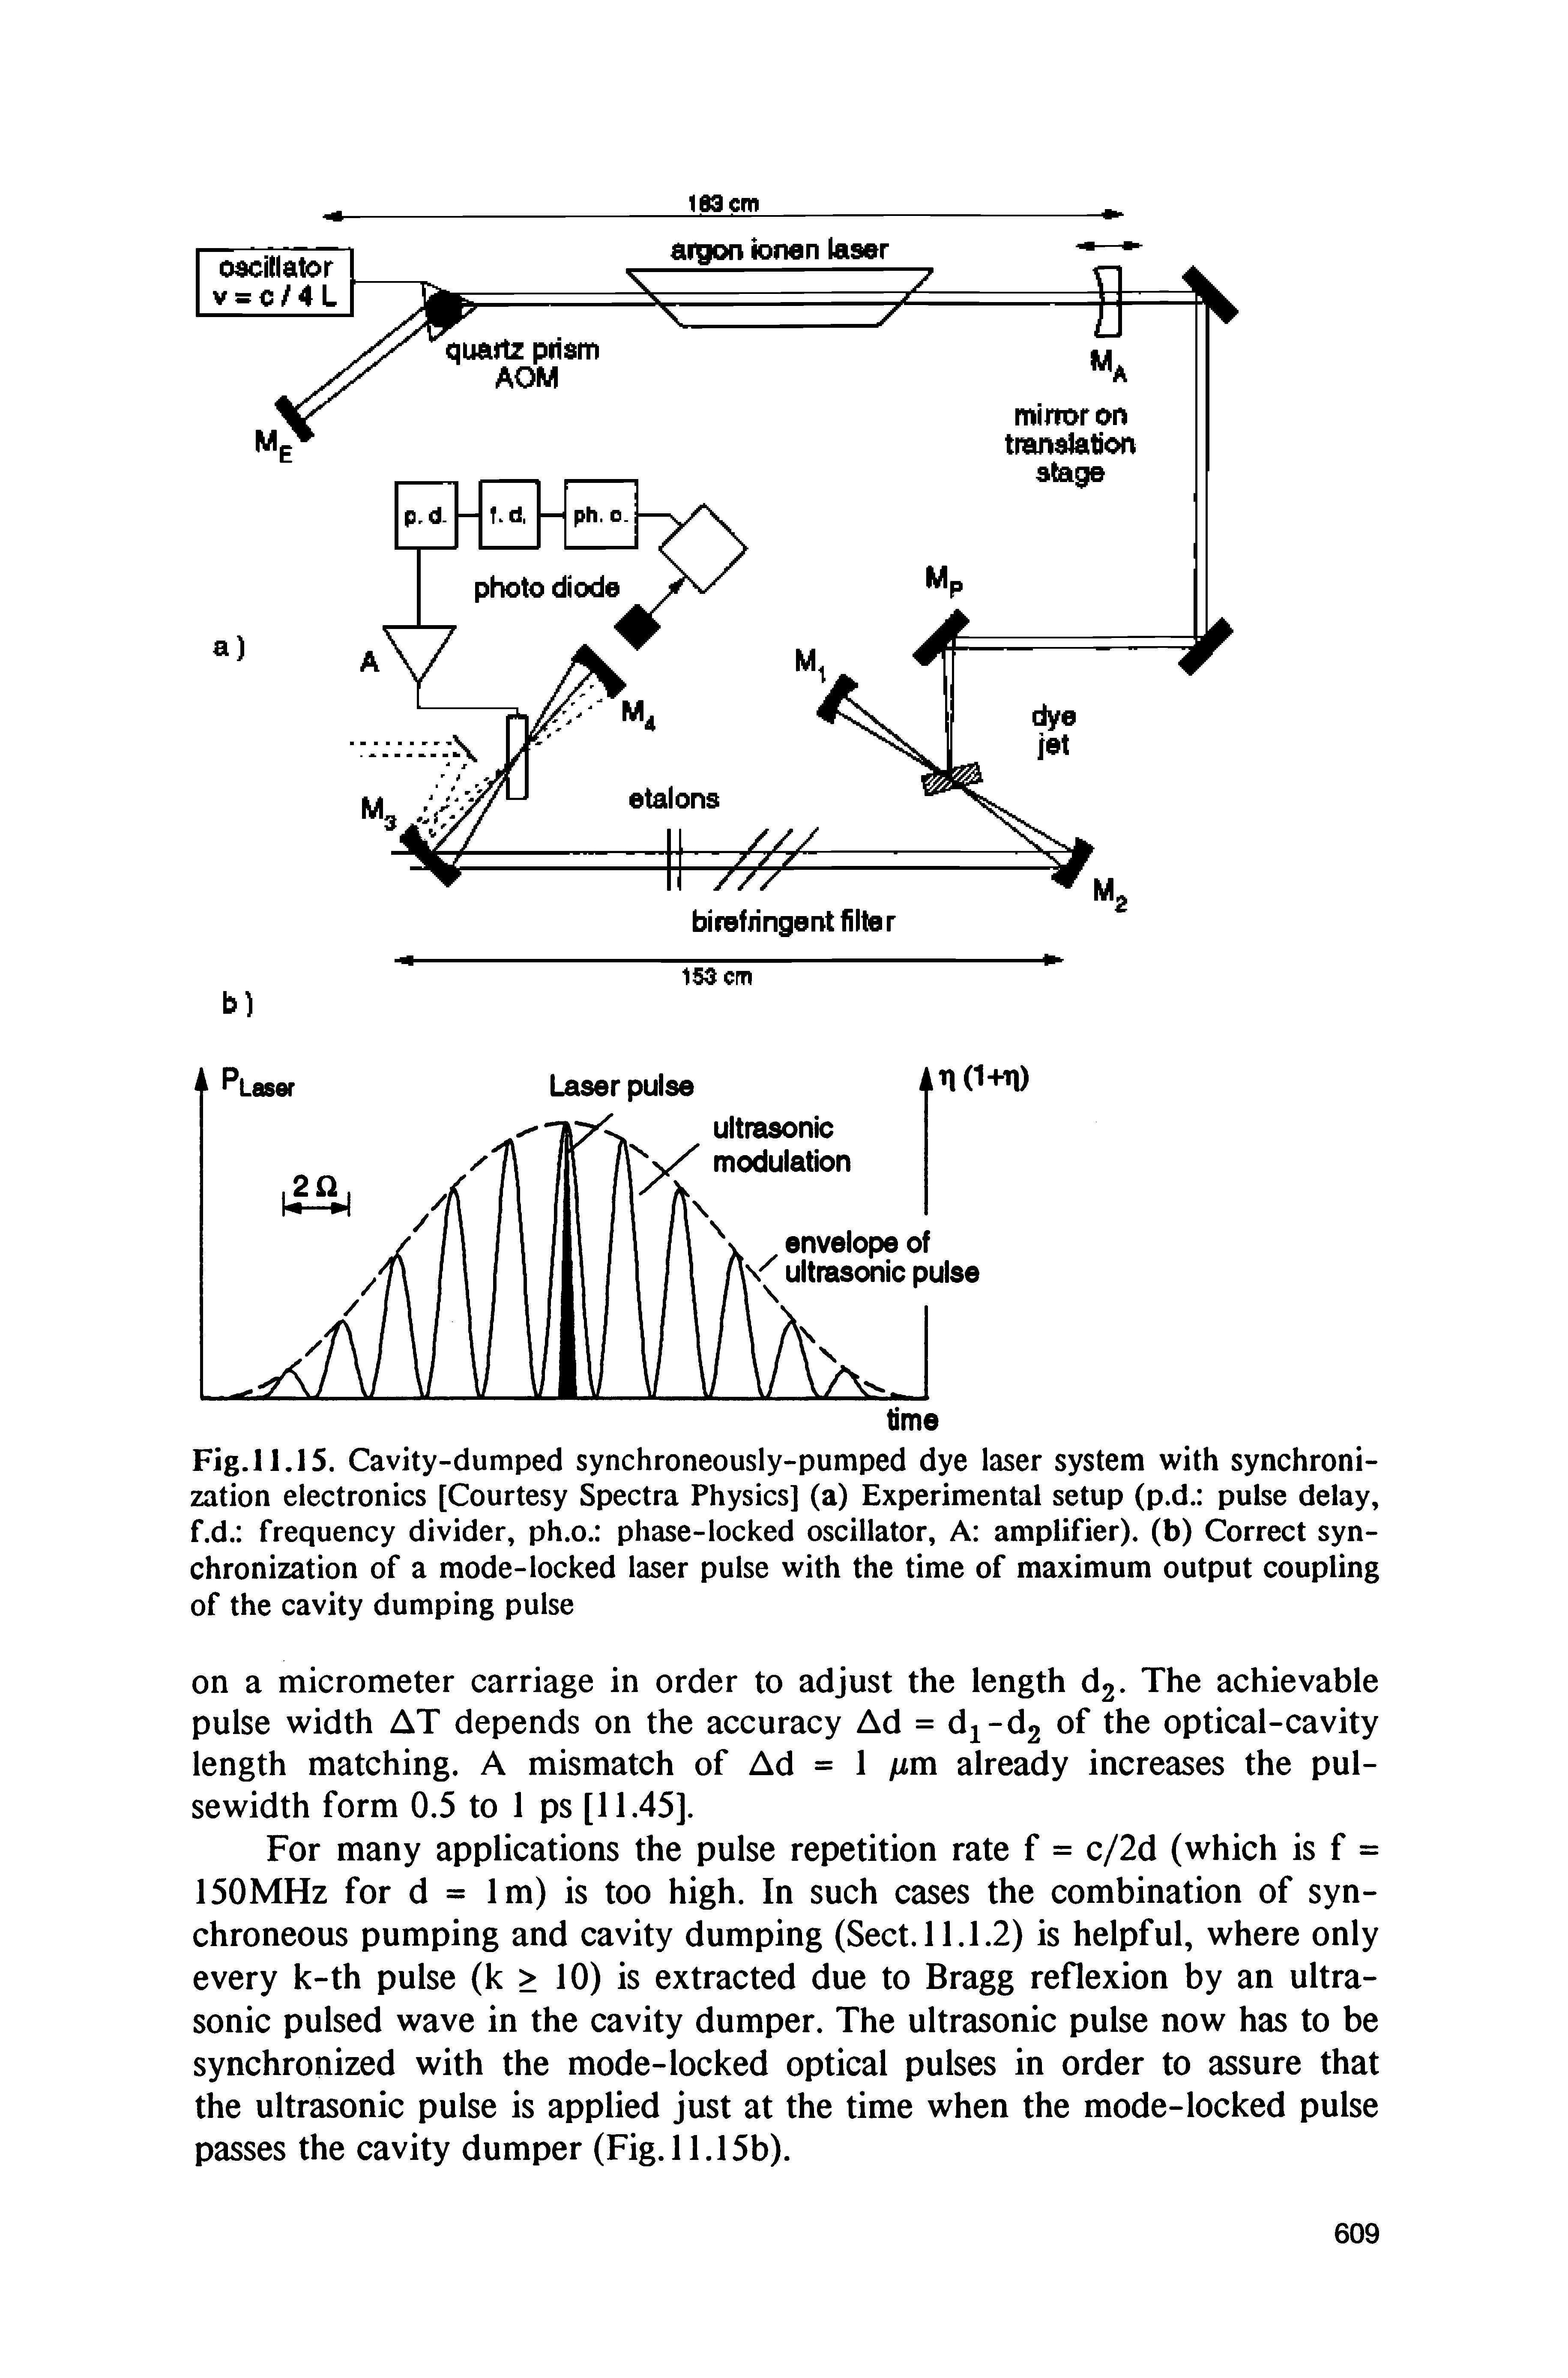 Fig.11.15. Cavity-dumped synchroneously-pumped dye laser system with synchronization electronics [Courtesy Spectra Physics] (a) Experimental setup (p.d. pulse delay, f.d. frequency divider, ph.o. phase-locked oscillator. A amplifier), (b) Correct synchronization of a mode-locked laser pulse with the time of maximum output coupling of the cavity dumping pulse...